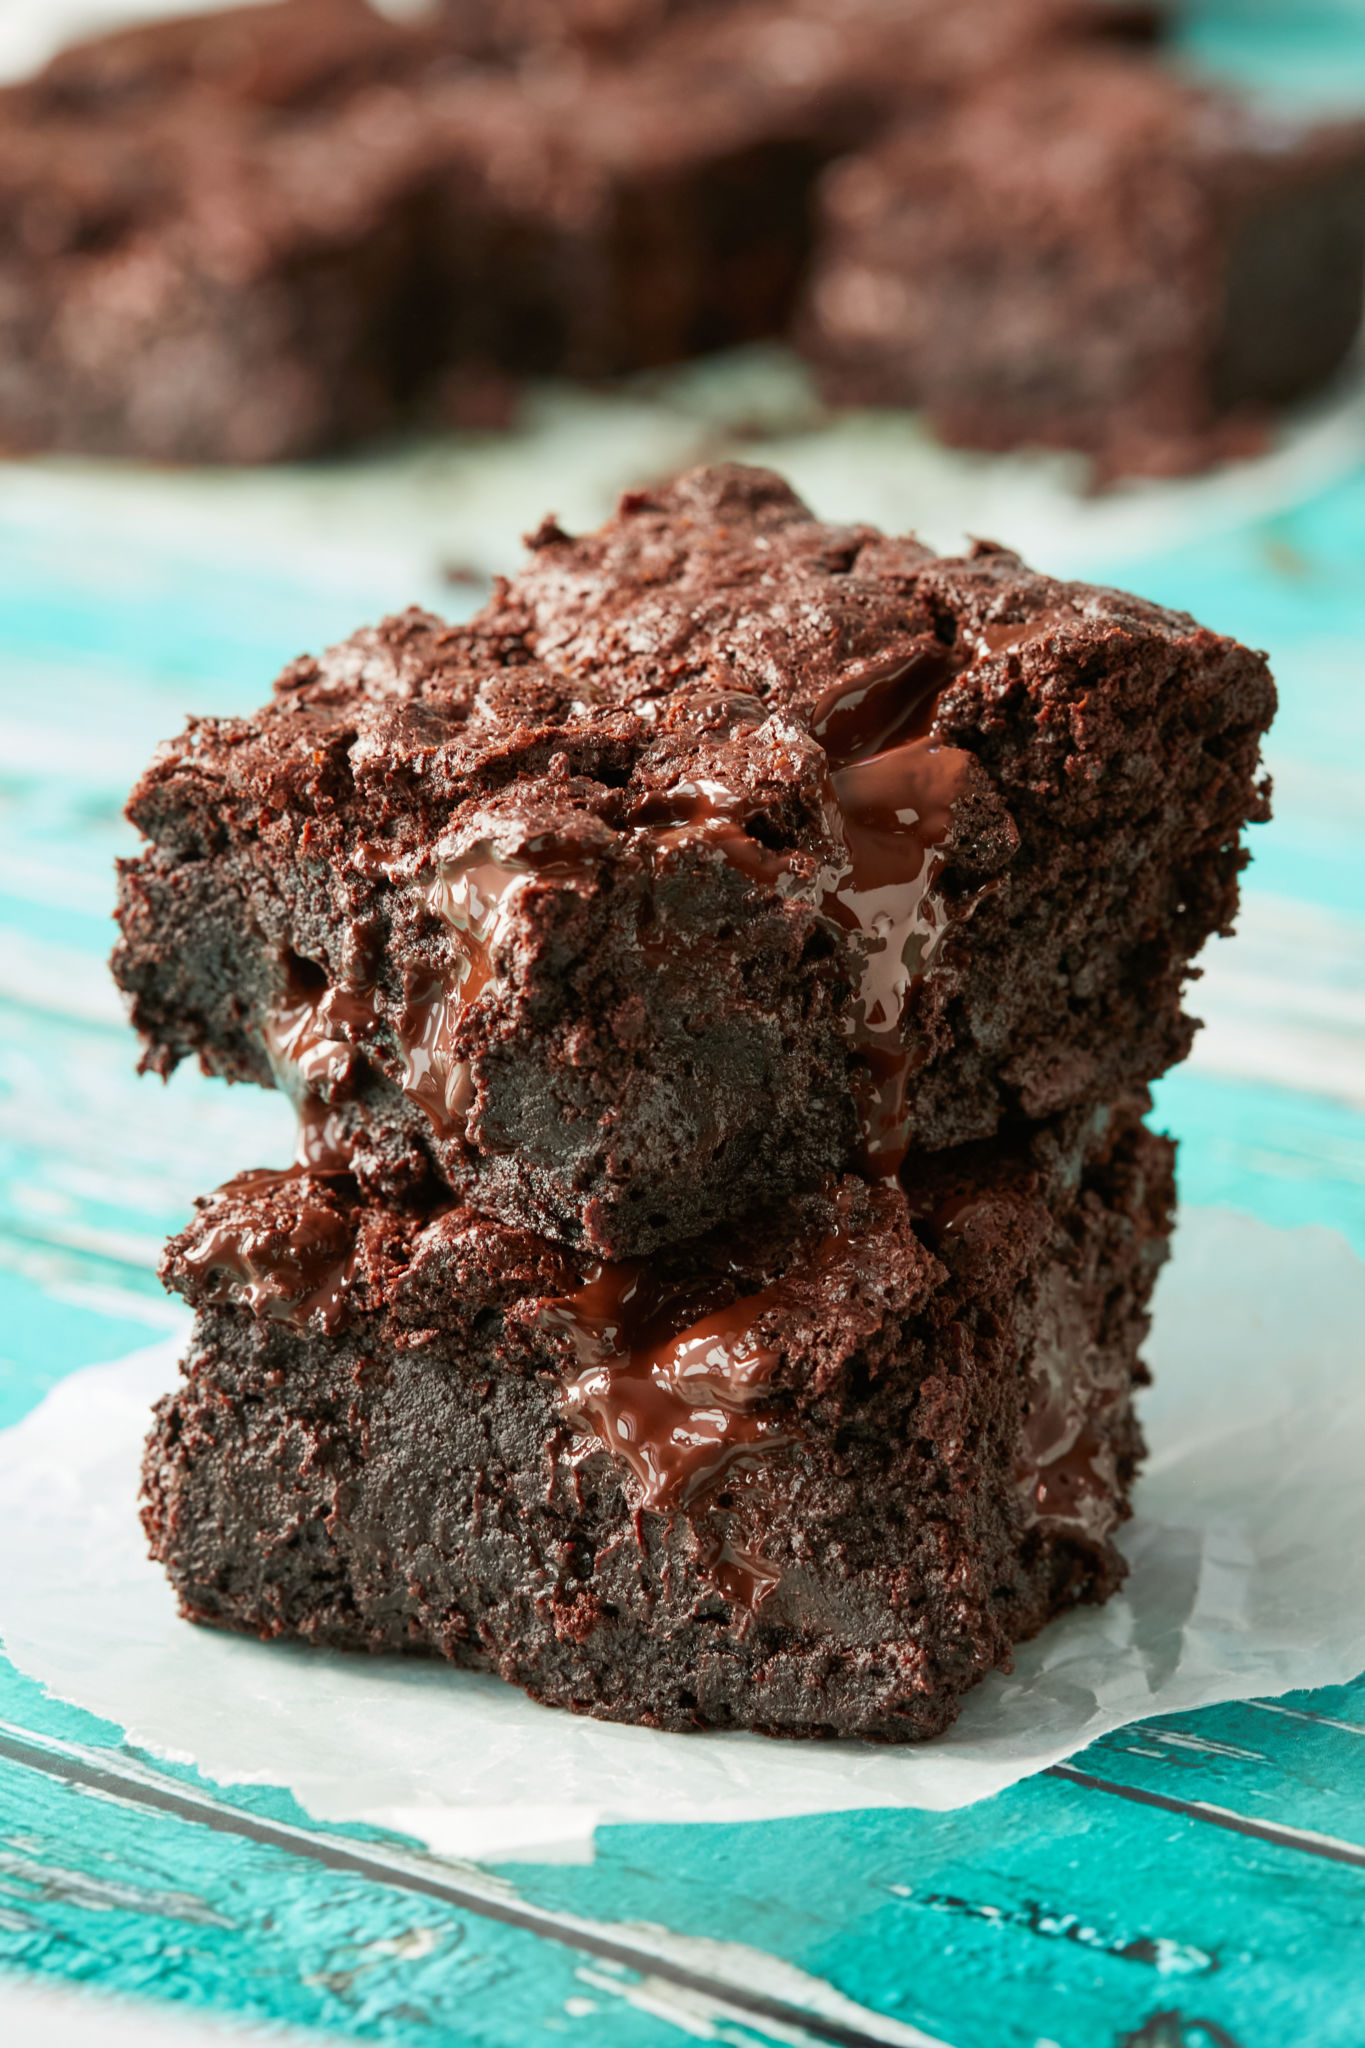 Two boxed brownies sitting on top of each other, showing texture and consistency.